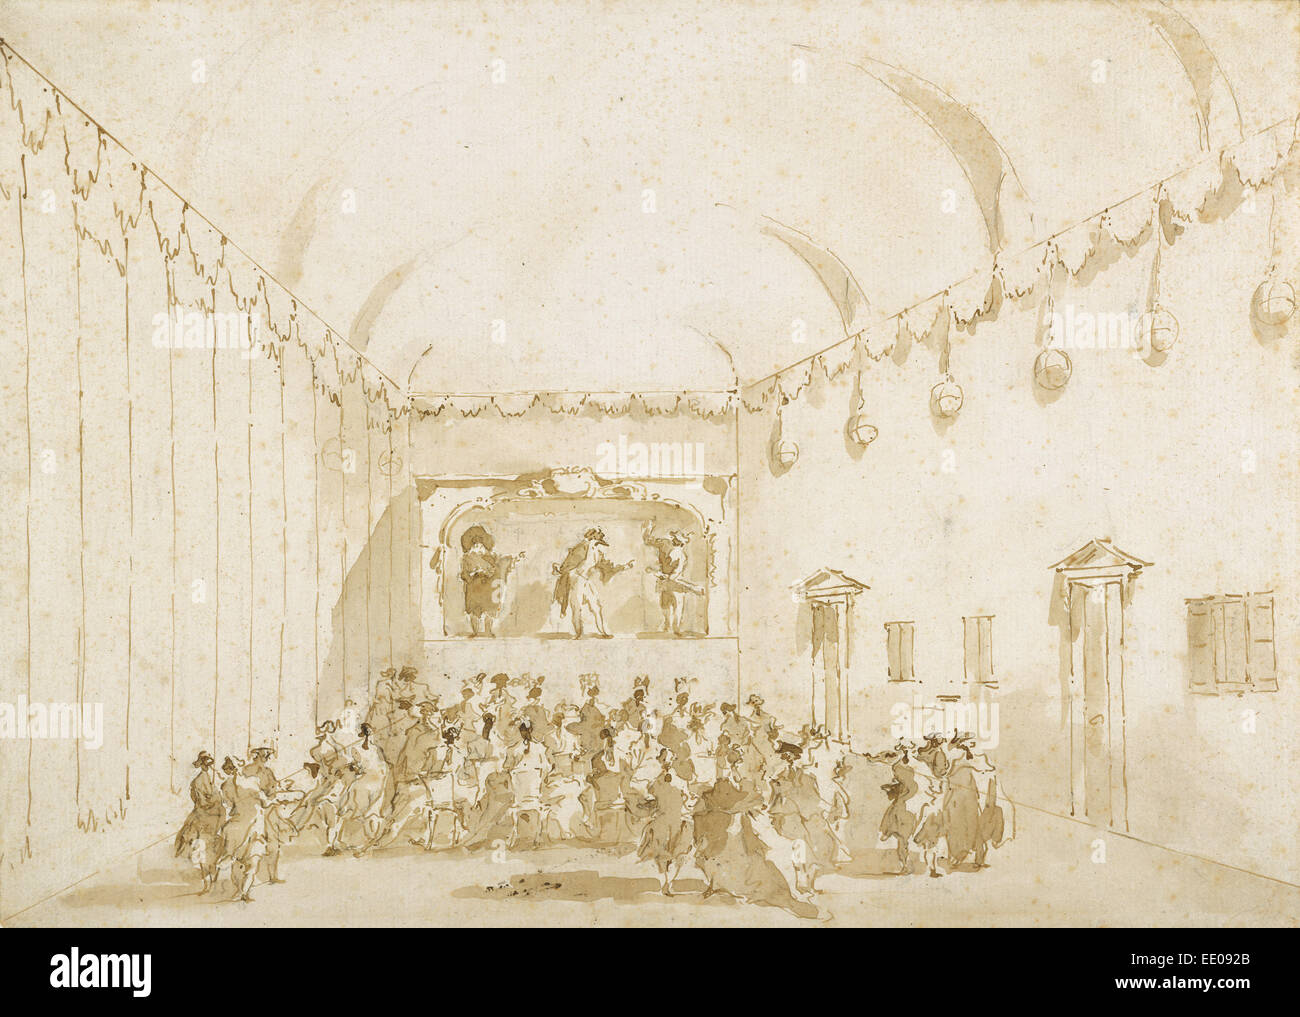 A Theatrical Performance; Francesco Guardi, Italian, 1712 - 1793; Italy, Europe; 1782; Pen and brown ink and brush Stock Photo